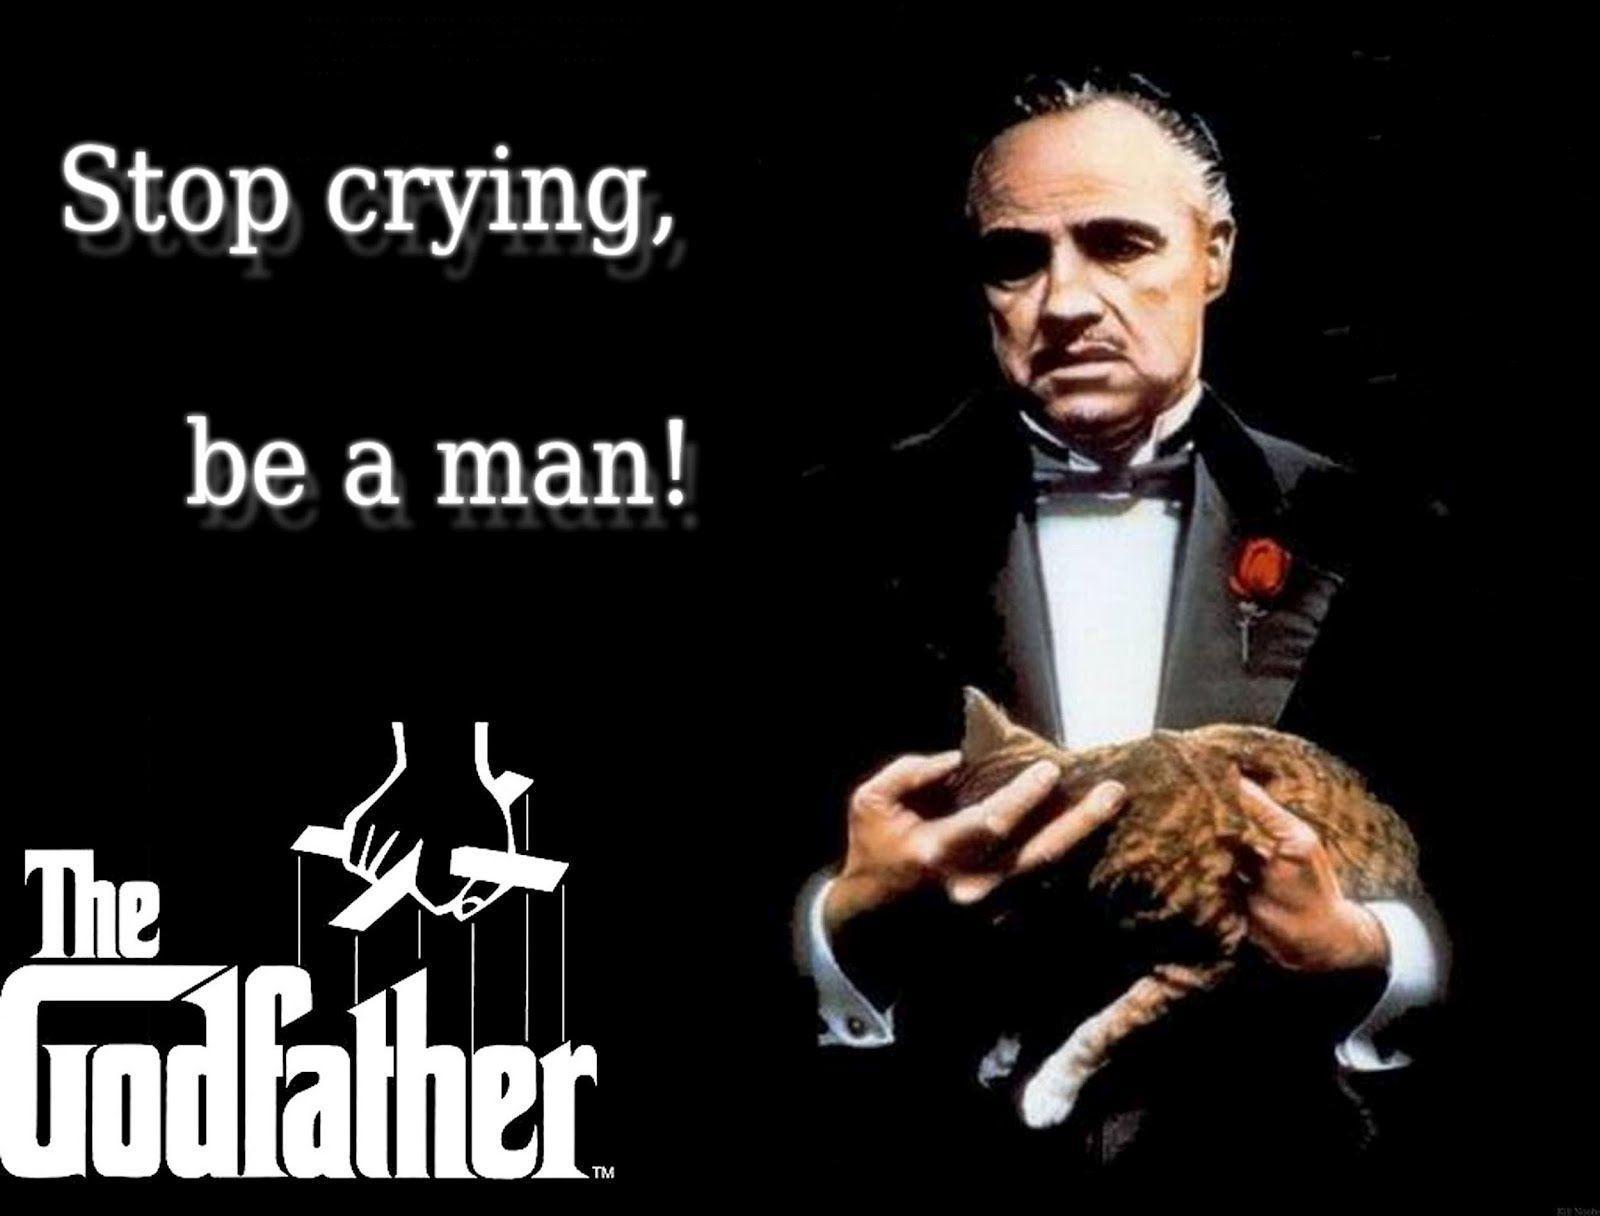 Wallpaper For > Godfather Wallpaper Quotes